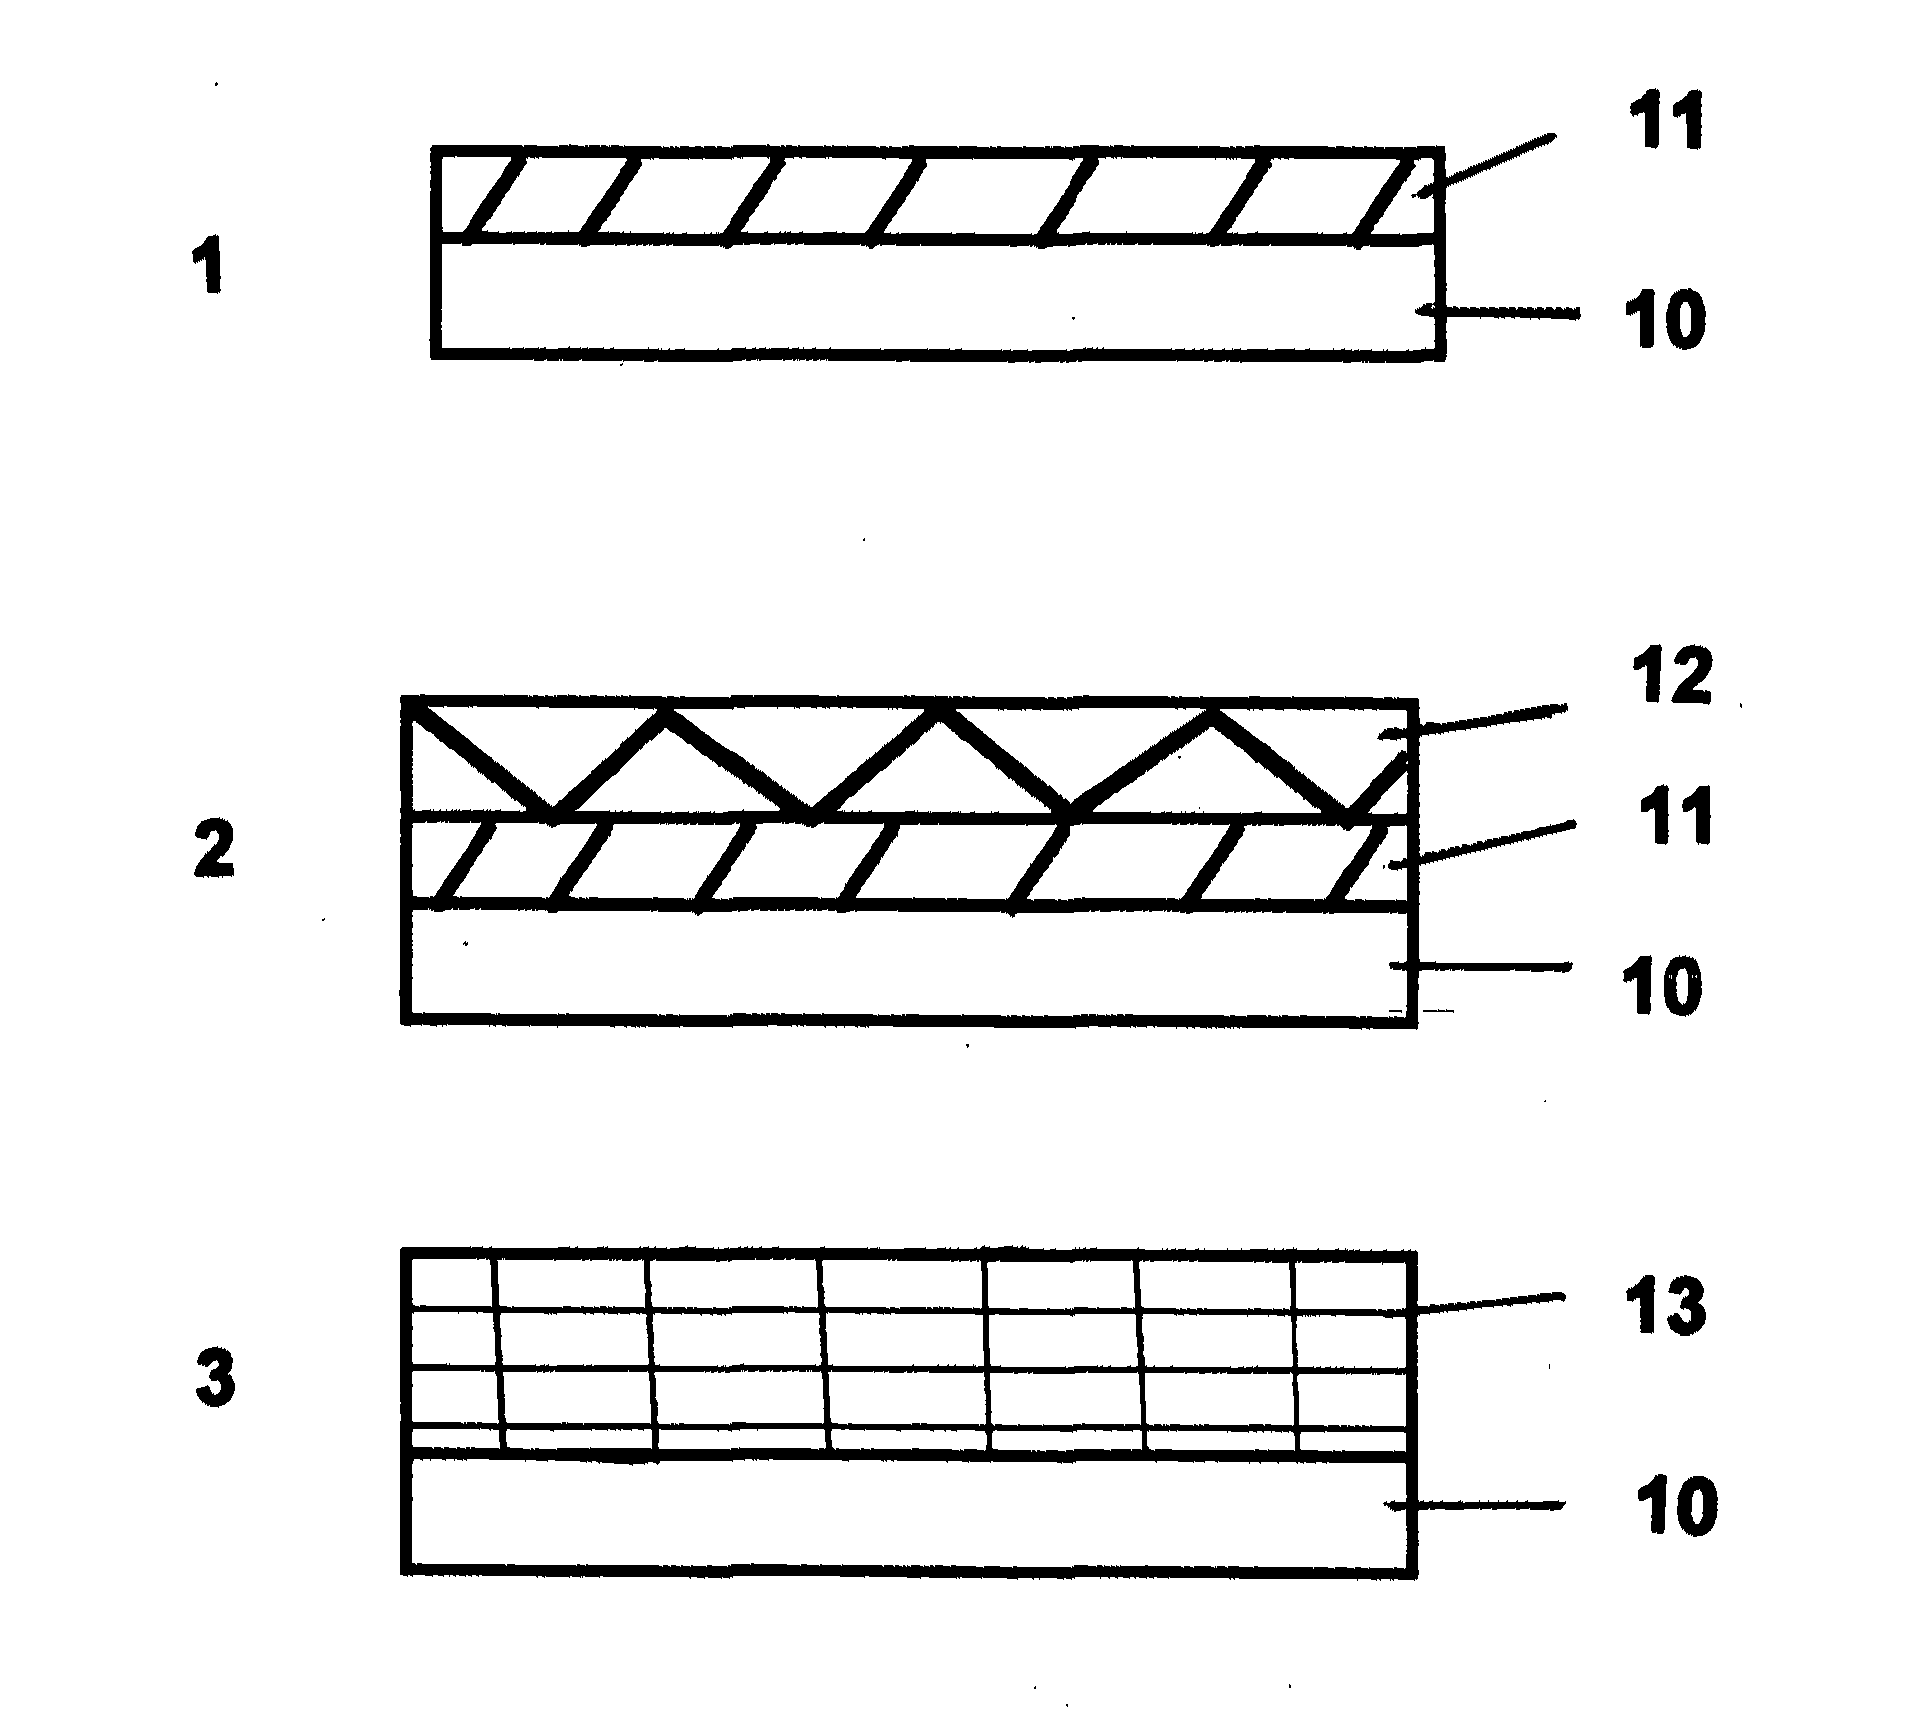 Method of forming a solid state cathode for high energy density secondary batteries